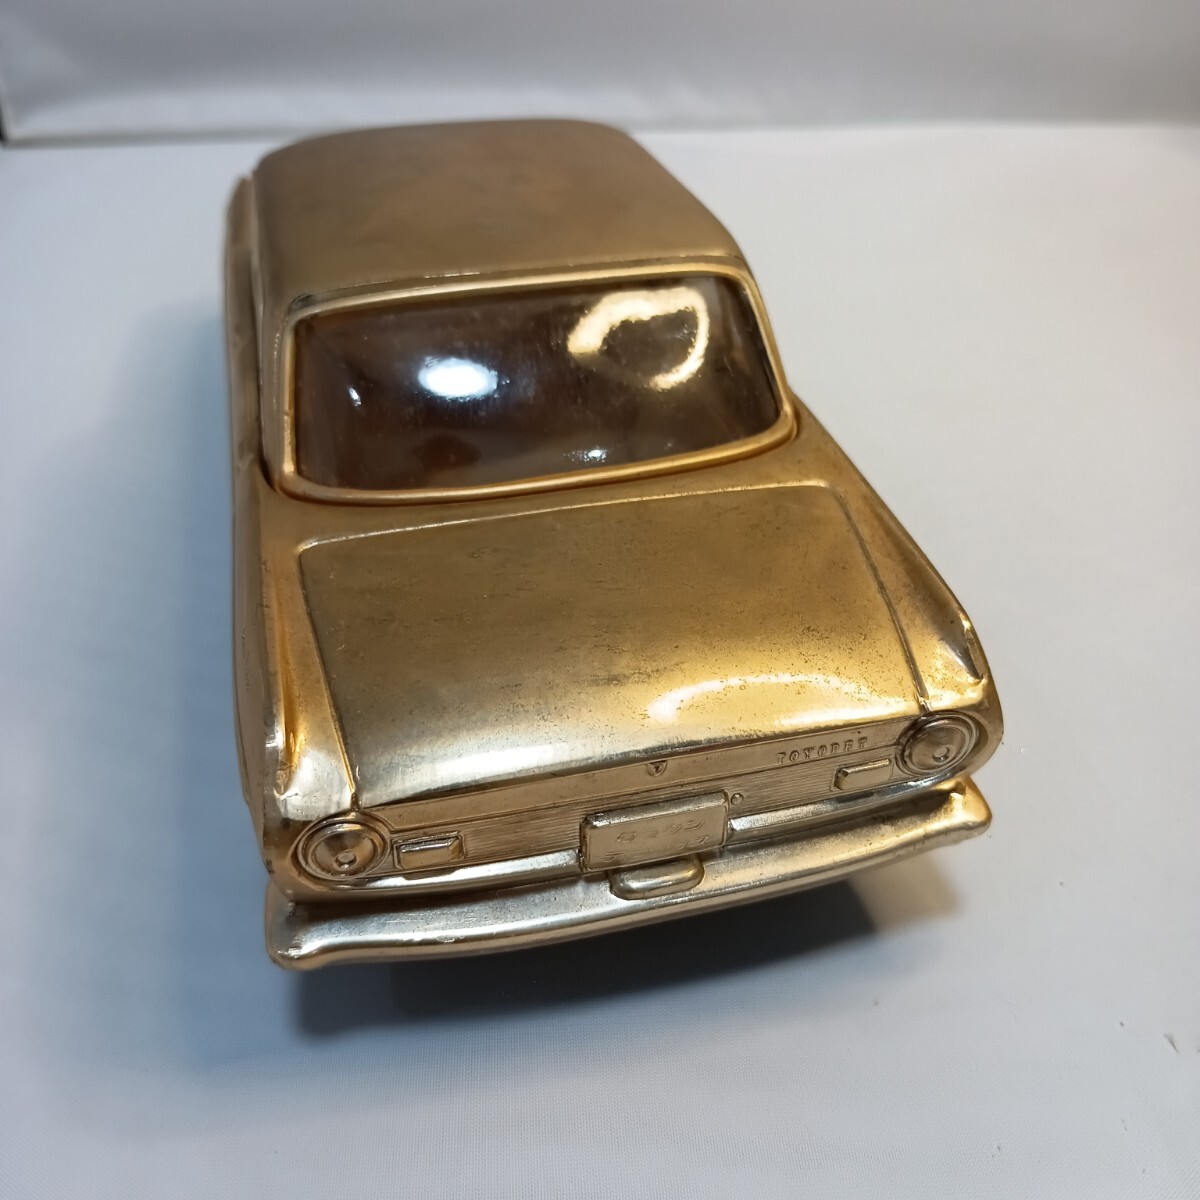  Toyota Toyopet [ Crown Deluxe ] made of metal cigarette case original box have beautiful goods Showa Retro 